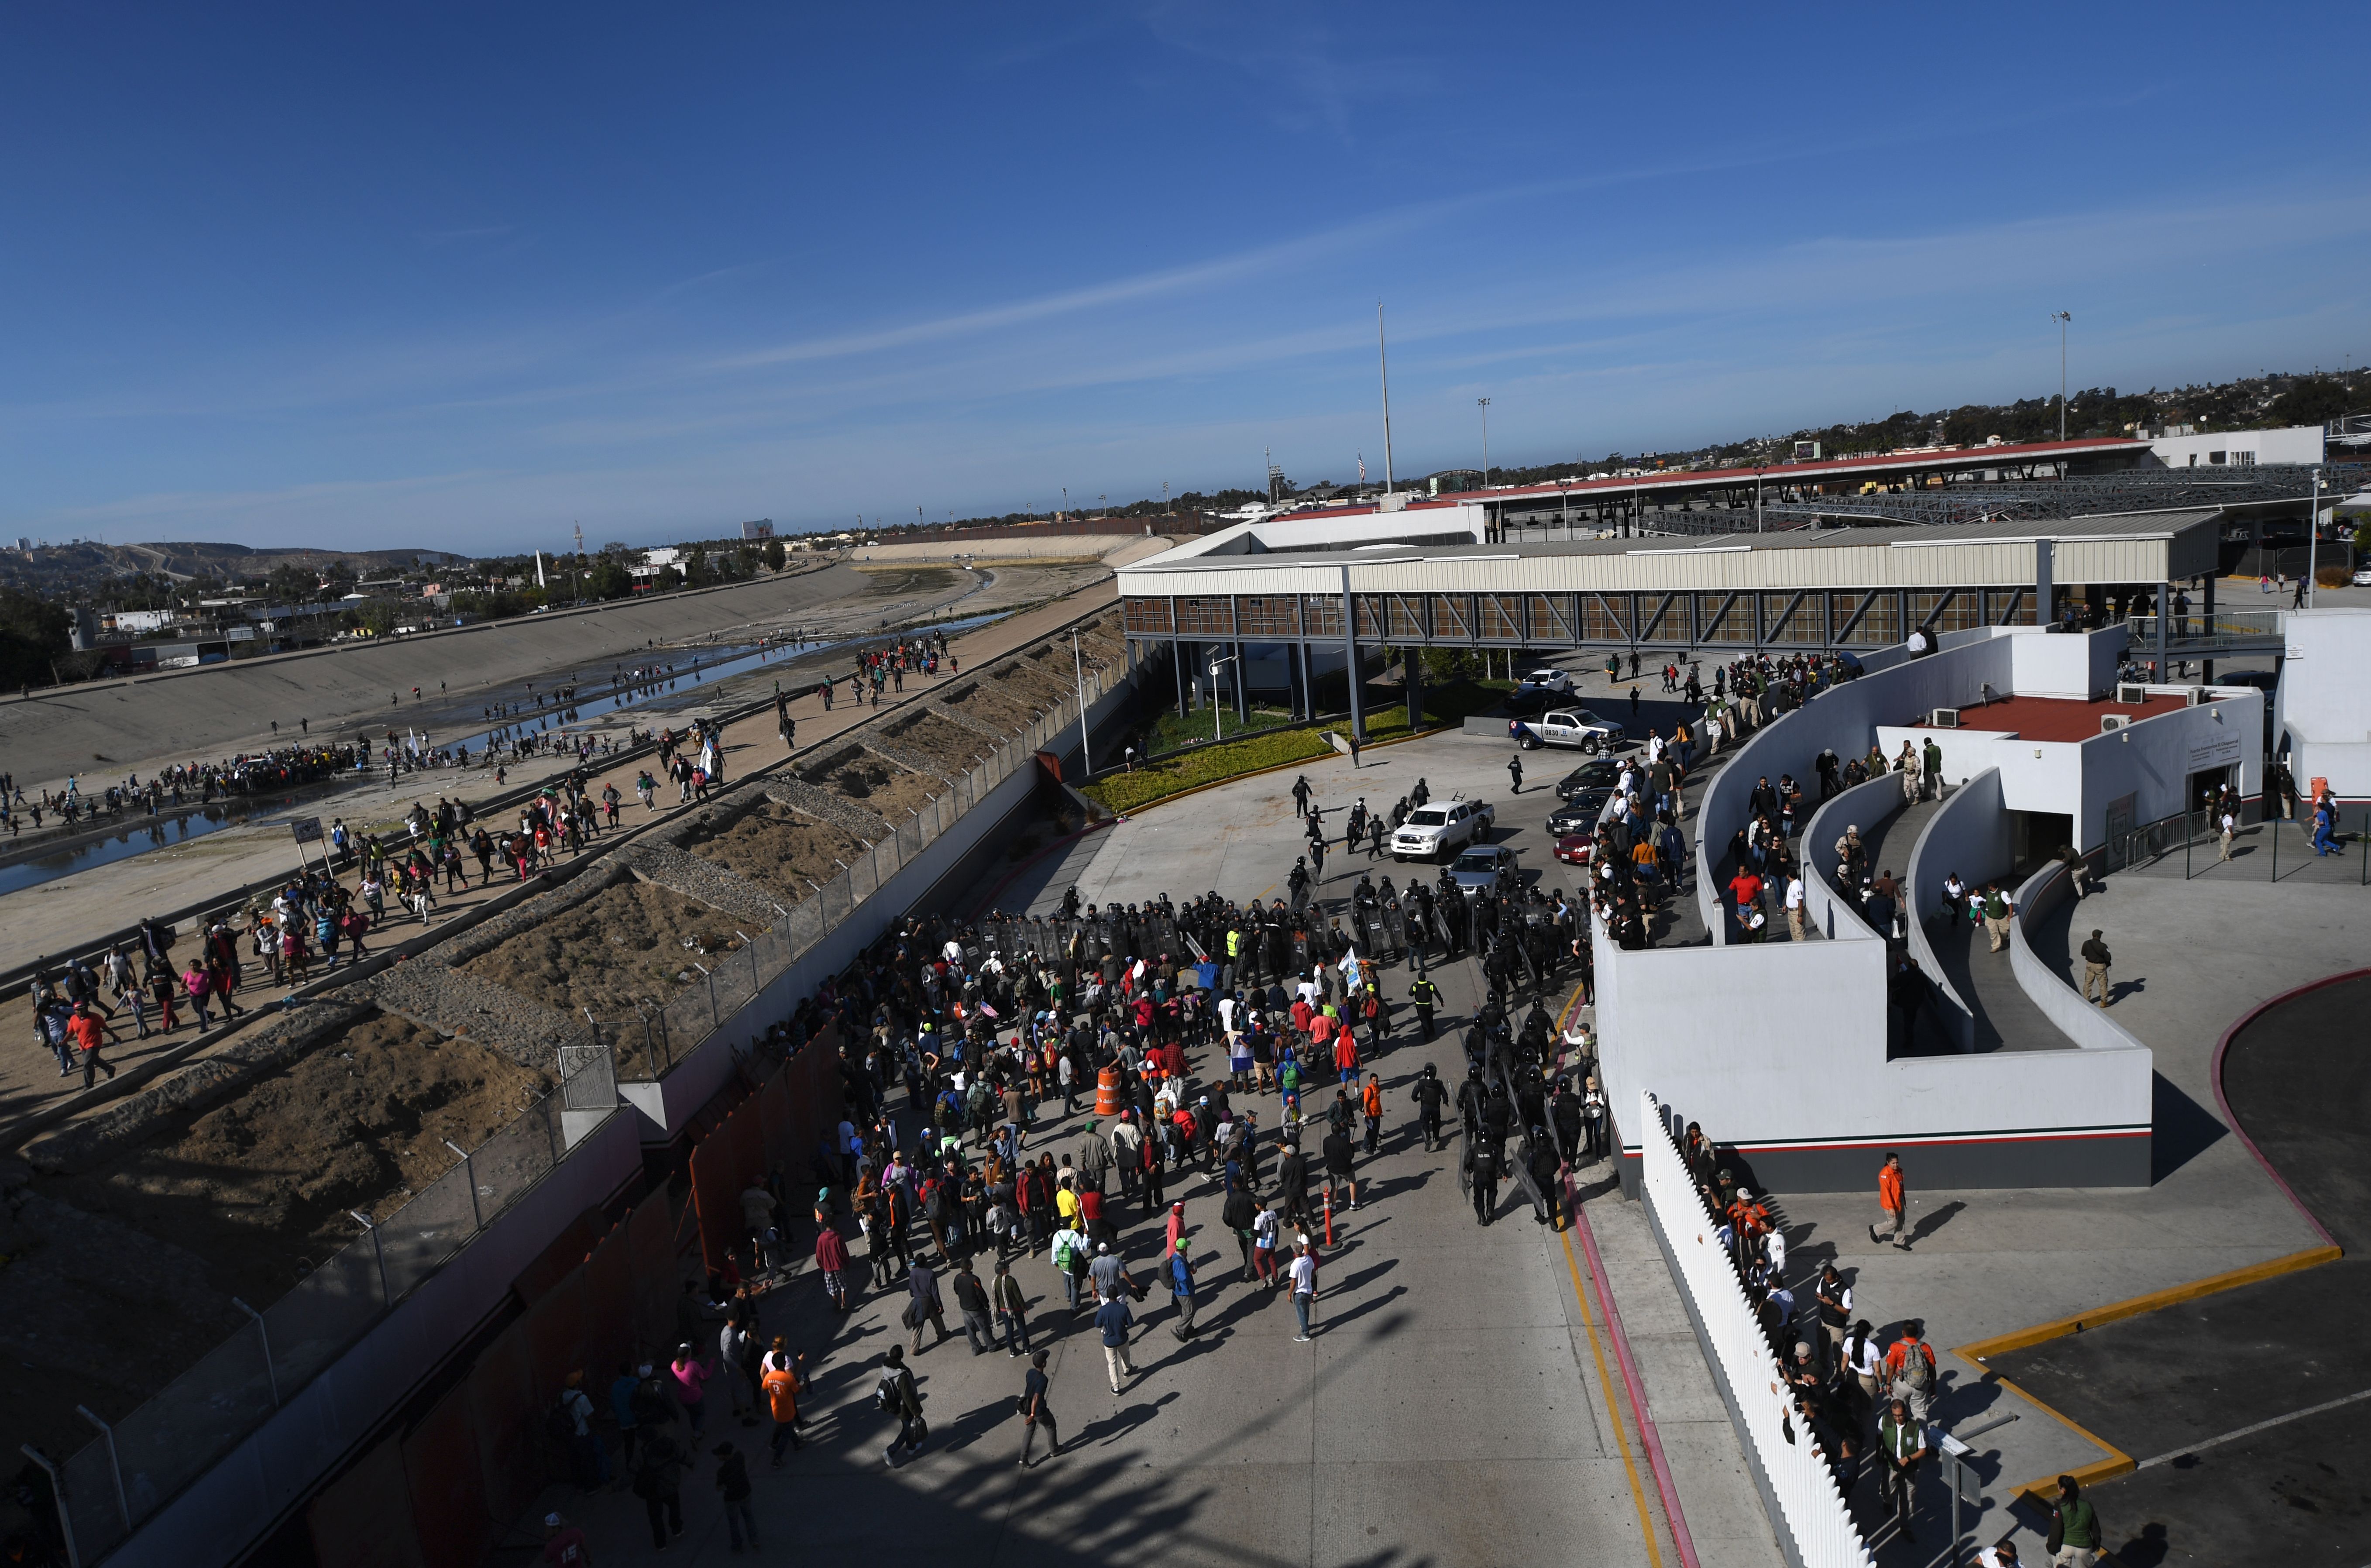 A group of Central American migrants -mostly from Honduras- get to El Chaparral port of entry after crossing the almost dry riverbed of the Tijuana River, in Tijuana, Baja California State, Mexico, on November 25, 2018. - Hundreds of migrants attempted to storm a border fence separating Mexico from the US on Sunday amid mounting fears they will be kept in Mexico while their applications for a asylum are processed. An AFP photographer said the migrants broke away from a peaceful march at a border bridge and tried to climb over a metal border barrier in the attempt to enter the United States. (Photo by Pedro PARDO / AFP) (Photo credit should read PEDRO PARDO/AFP/Getty Images)